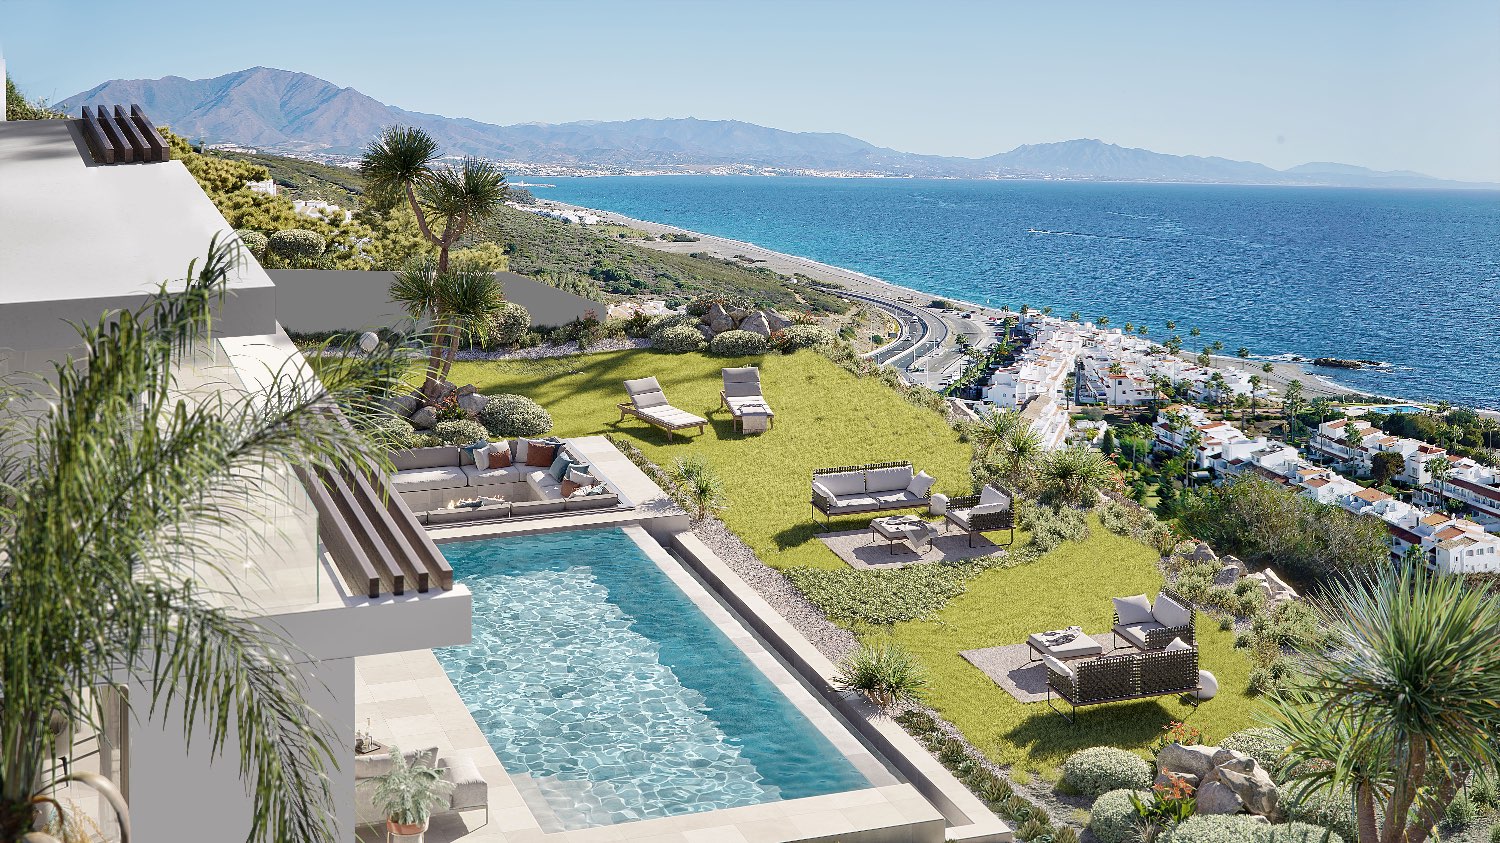 Outstanding luxury villa complex with the best panoramic views of the sea on the Costa del Sol